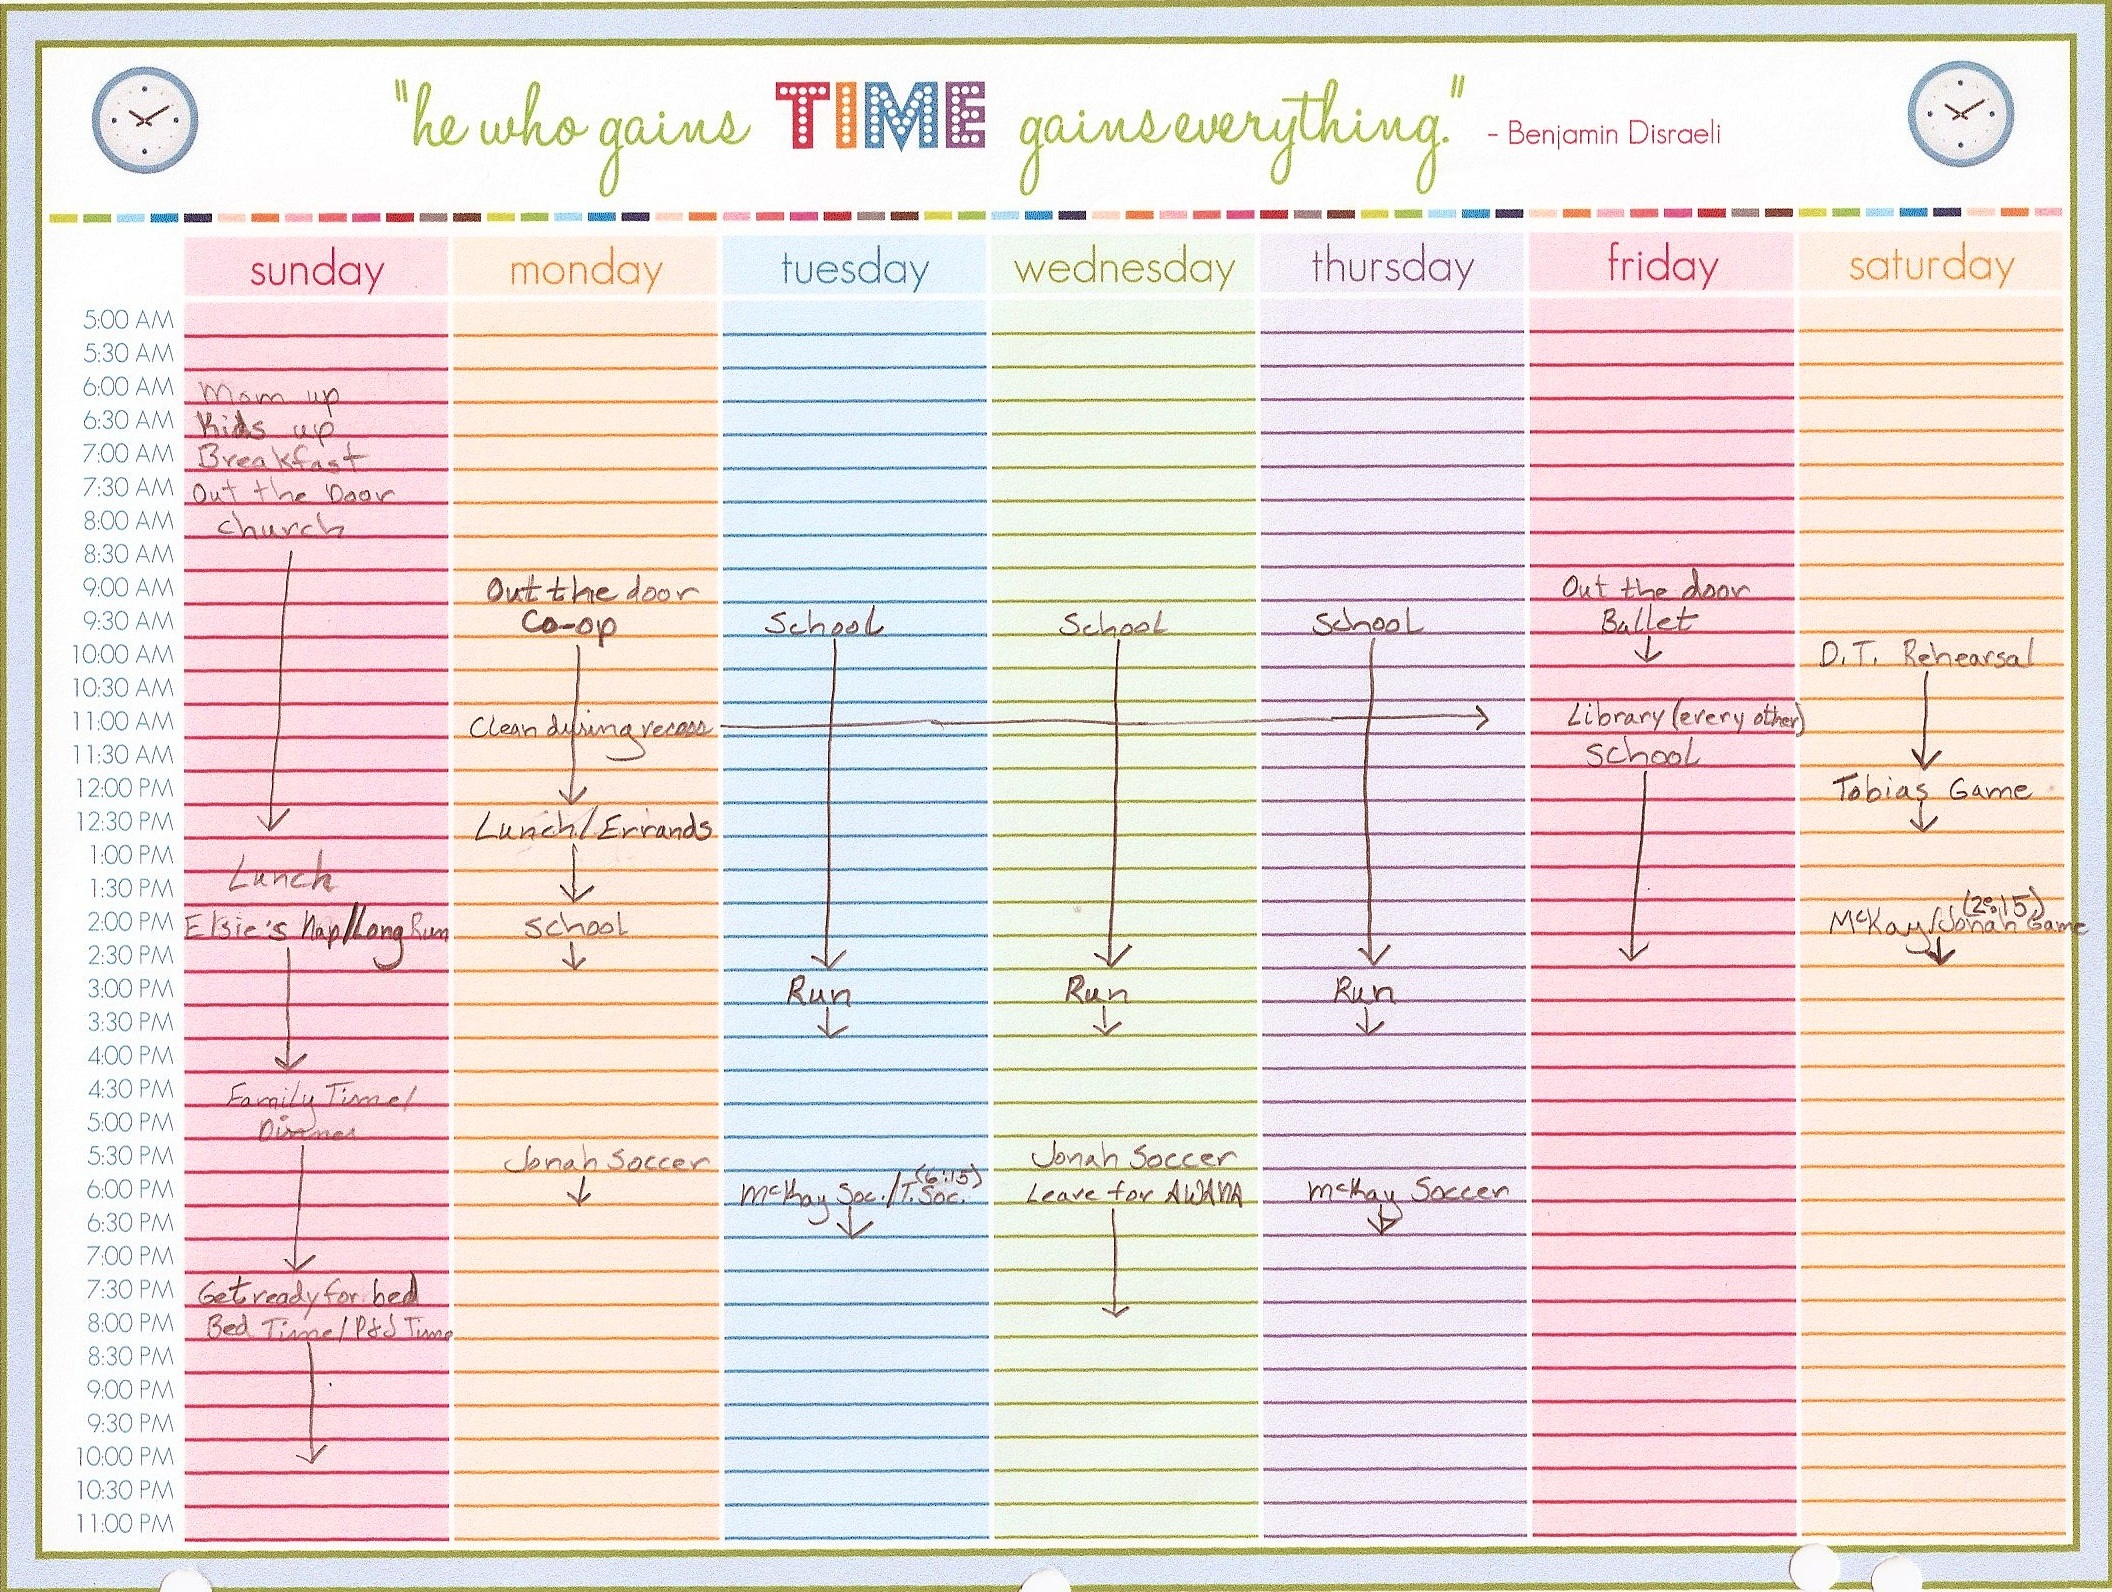 Free Calendar Template With Time Slots | Calendar Template pertaining to Printable Weekly Calendar With Time Slots